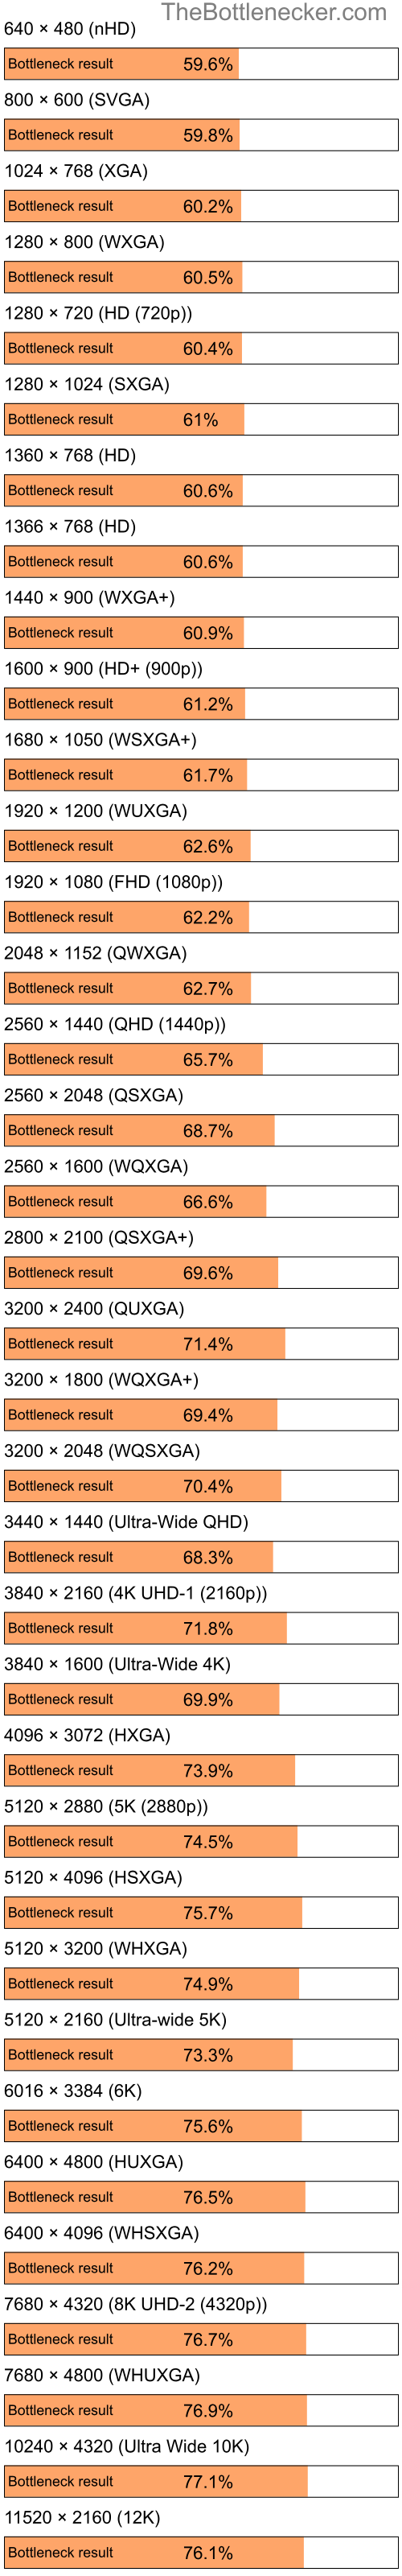 Bottleneck results by resolution for Intel Celeron M 410 and AMD Radeon X800 PRO in Processor Intense Tasks